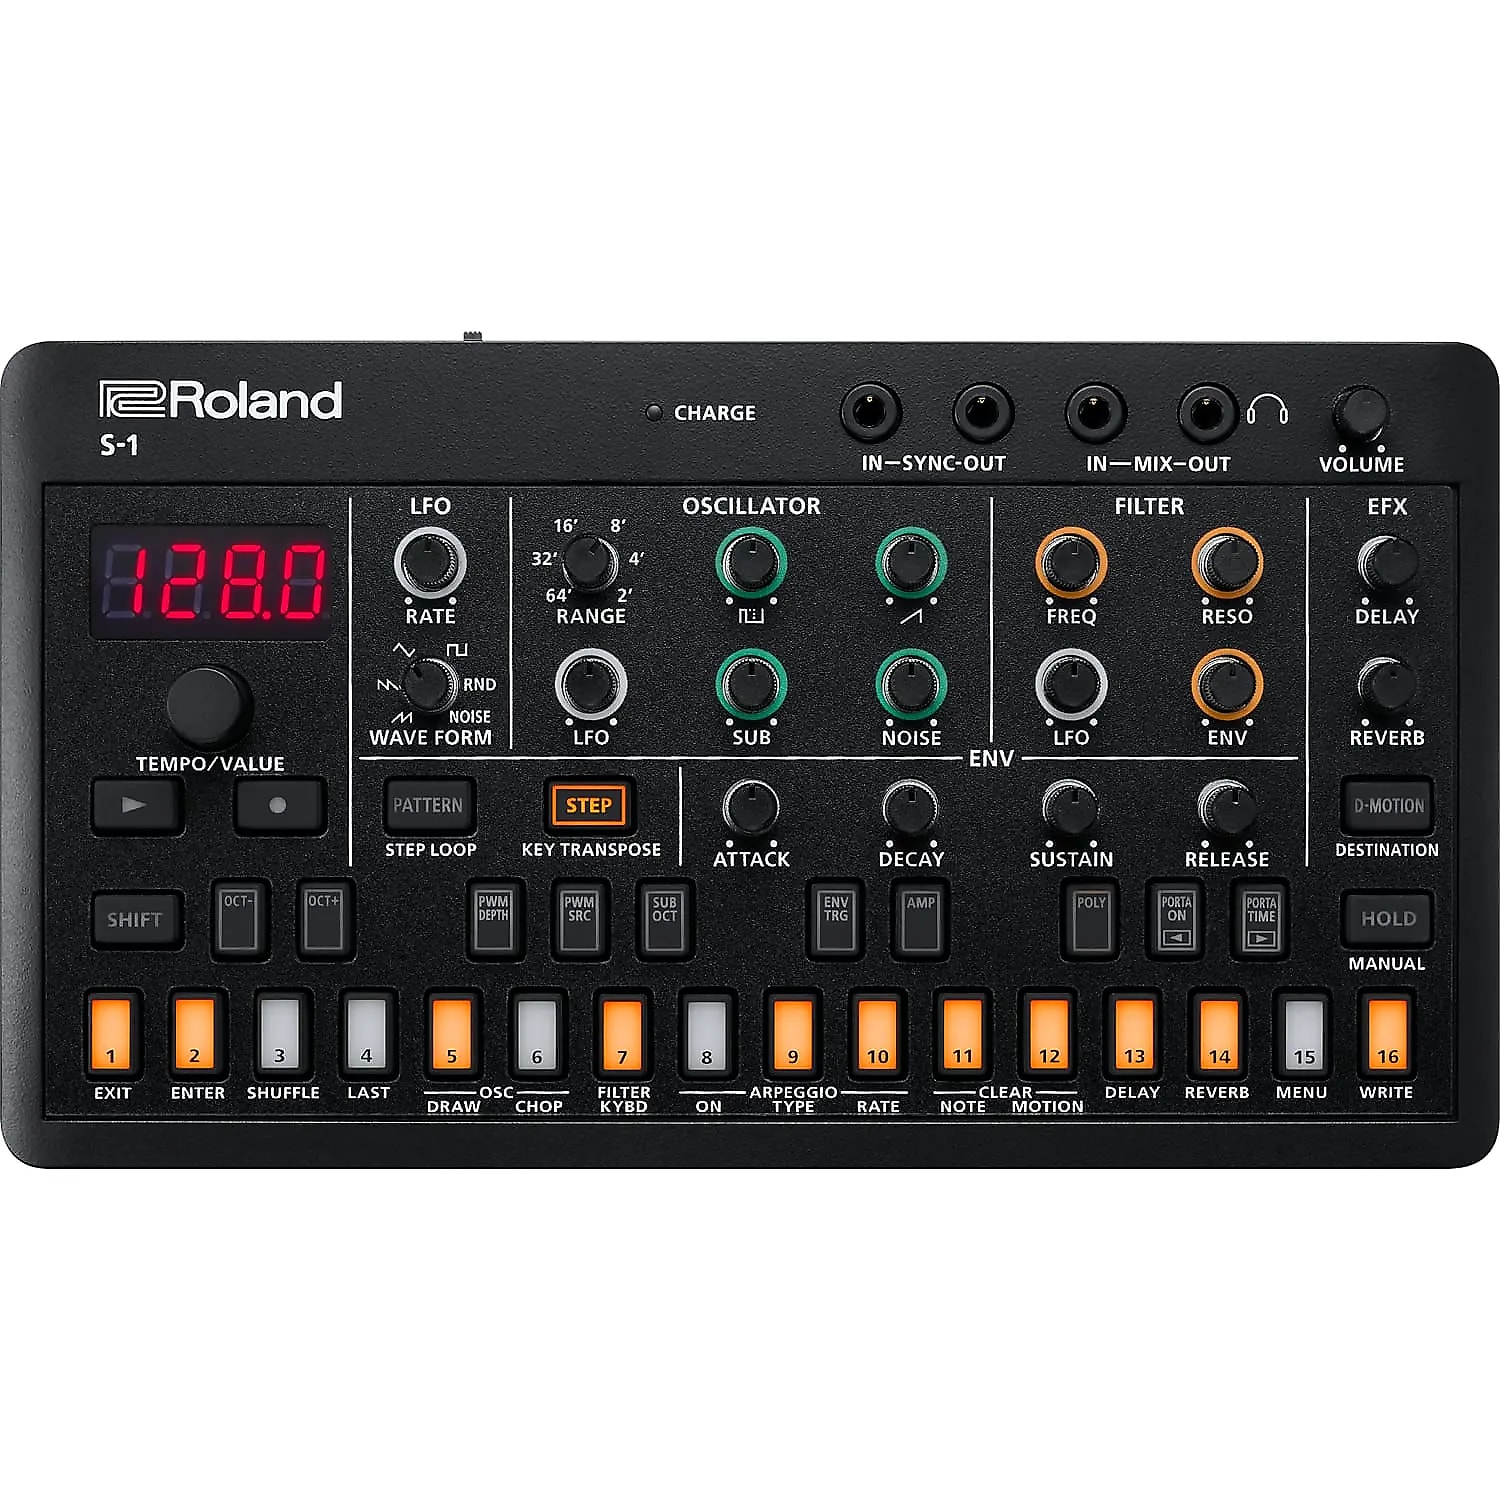 Roland S-1 AIRA Compact Tweak Synthesizer | Reverb